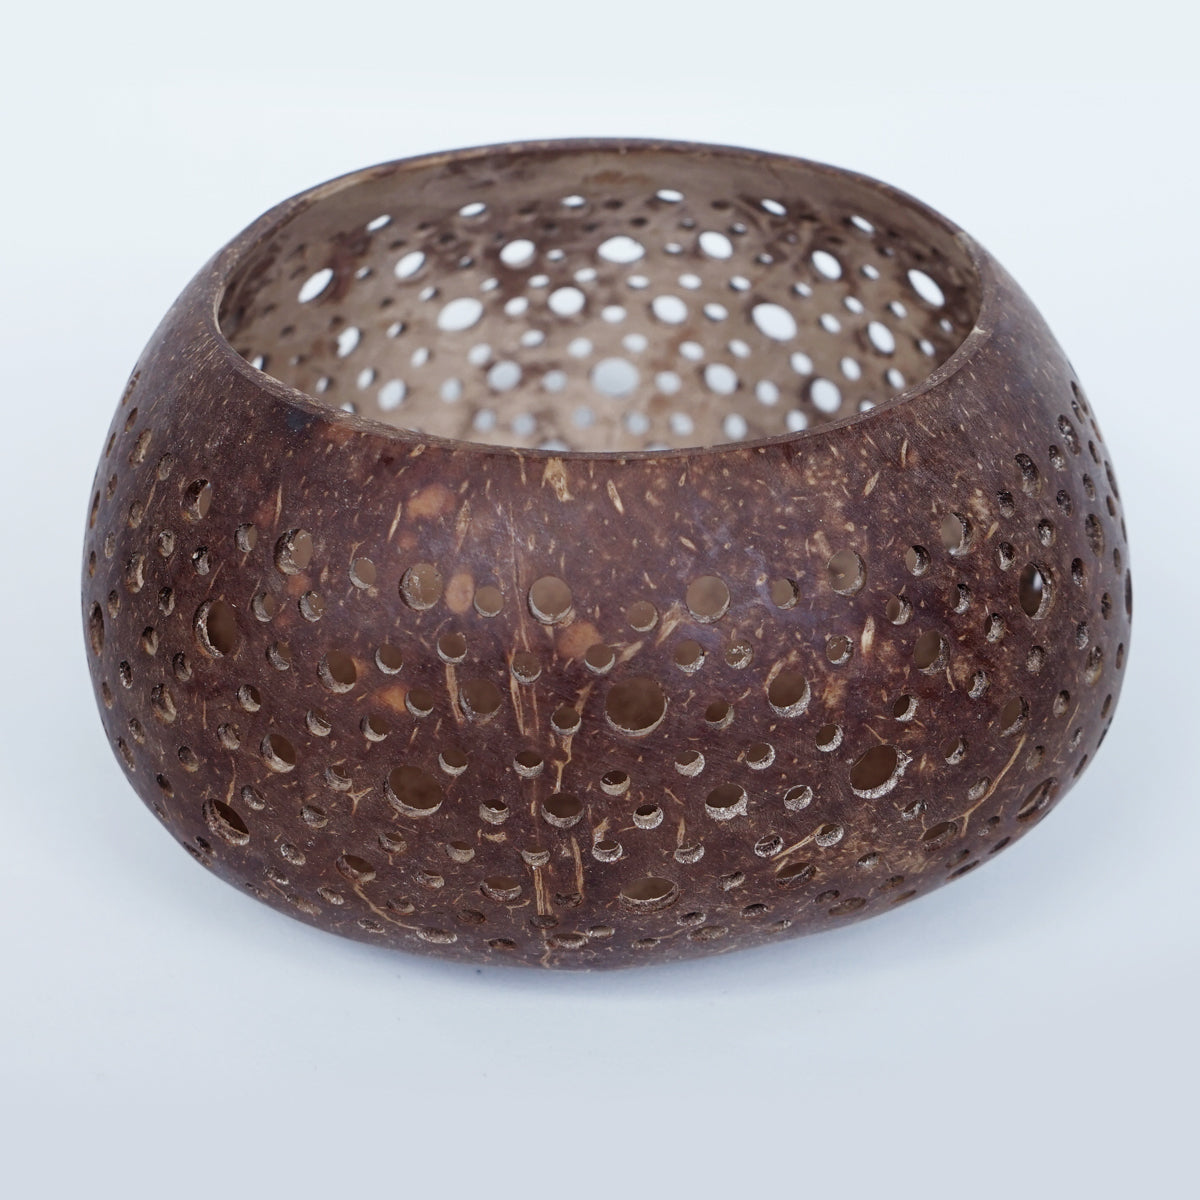 MULC015 NATURAL OLD COCONUT SHELL CARVED BOWL